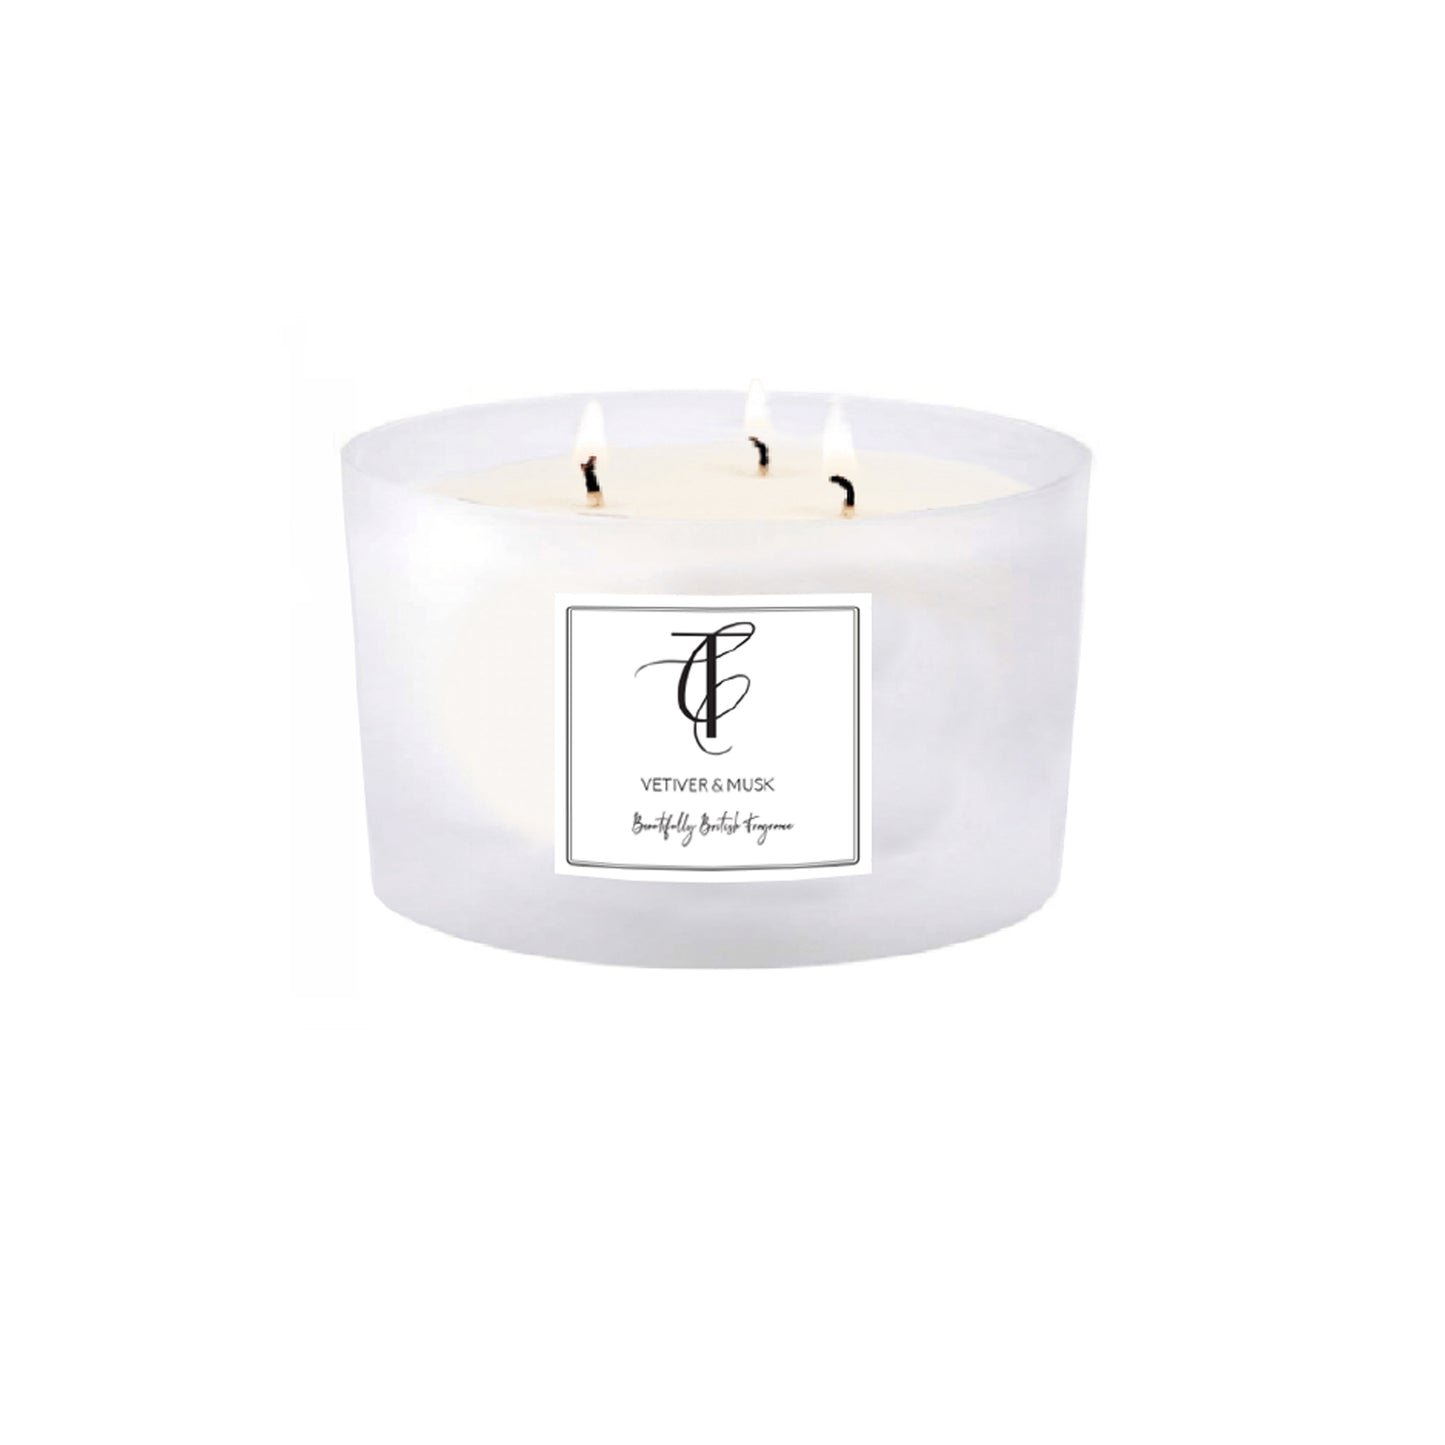 VETIVER & MUSK PASTEL MULTI-WICK CANDLE